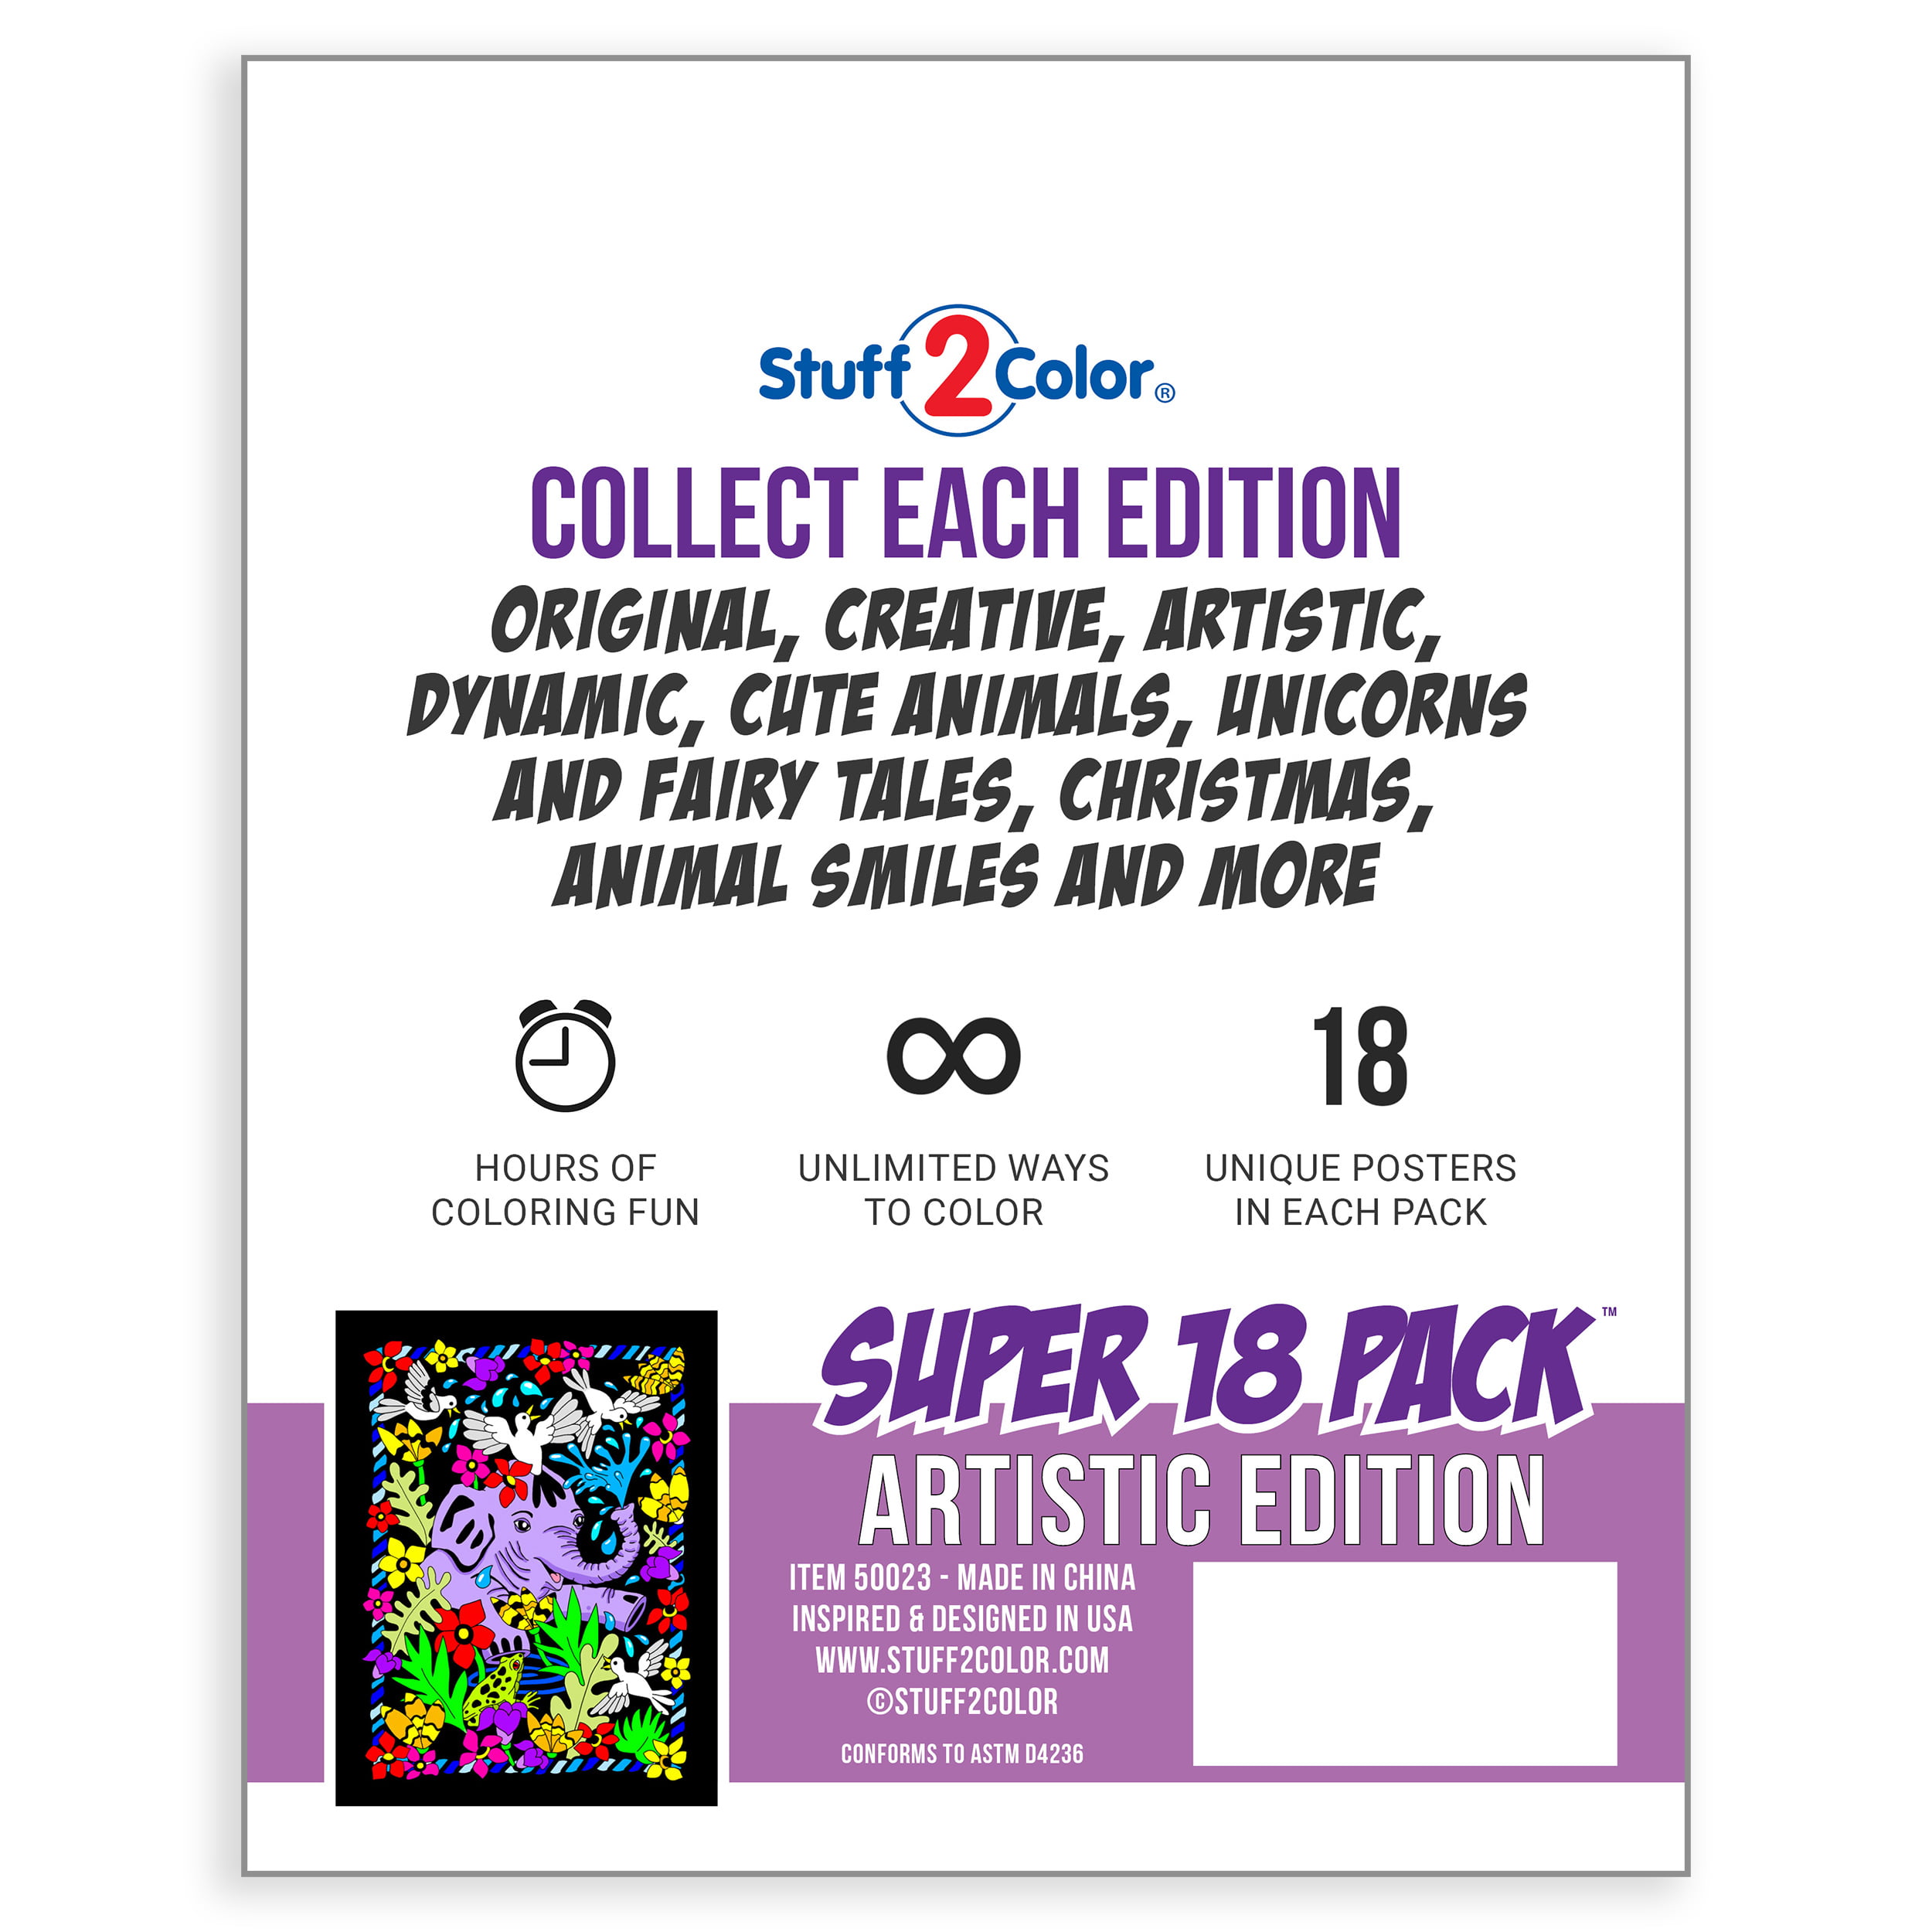 Super Pack of 18 Fuzzy Velvet Coloring Posters (Artistic Edition